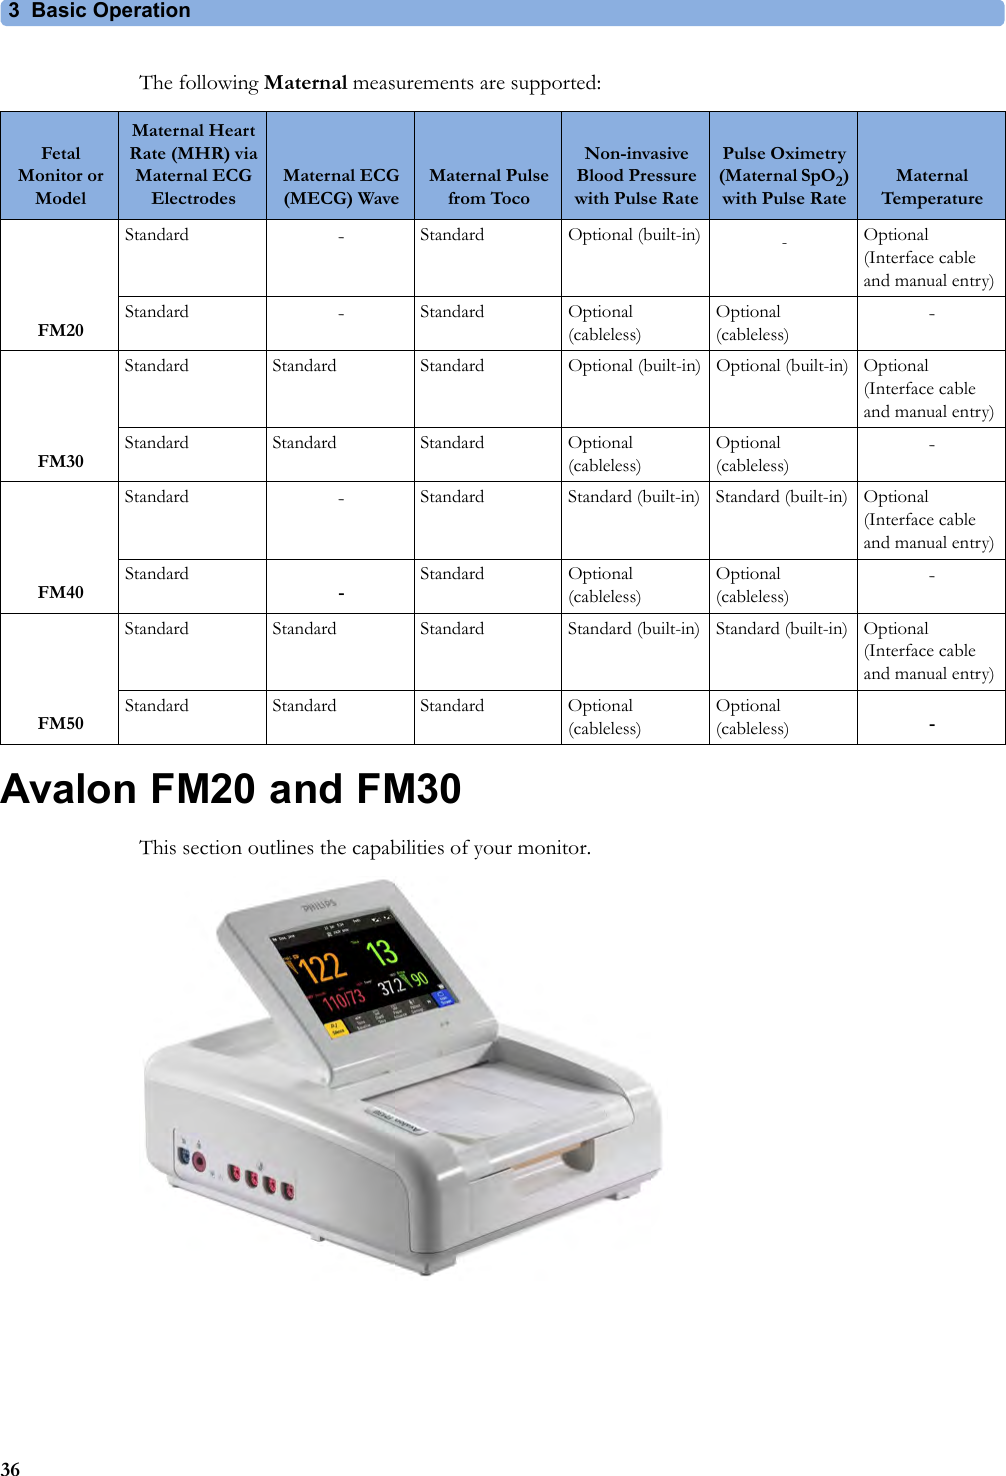 3 Basic Operation36The following Maternal measurements are supported:Avalon FM20 and FM30This section outlines the capabilities of your monitor.Fetal Monitor or ModelMaternal Heart Rate (MHR) via Maternal ECG ElectrodesMaternal ECG (MECG) WaveMaternal Pulse from TocoNon-invasive Blood Pressure with Pulse RatePulse Oximetry (Maternal SpO2) with Pulse RateMaternal TemperatureFM20Standard -Standard Optional (built-in) -Optional (Interface cable and manual entry)Standard  -Standard Optional (cableless)Optional (cableless)-FM30Standard Standard Standard Optional (built-in) Optional (built-in) Optional (Interface cable and manual entry)Standard Standard Standard Optional (cableless)Optional (cableless)-FM40Standard -Standard Standard (built-in) Standard (built-in) Optional (Interface cable and manual entry)Standard -Standard Optional (cableless)Optional (cableless)-FM50Standard Standard Standard Standard (built-in) Standard (built-in) Optional (Interface cable and manual entry)Standard Standard Standard Optional (cableless)Optional (cableless) -